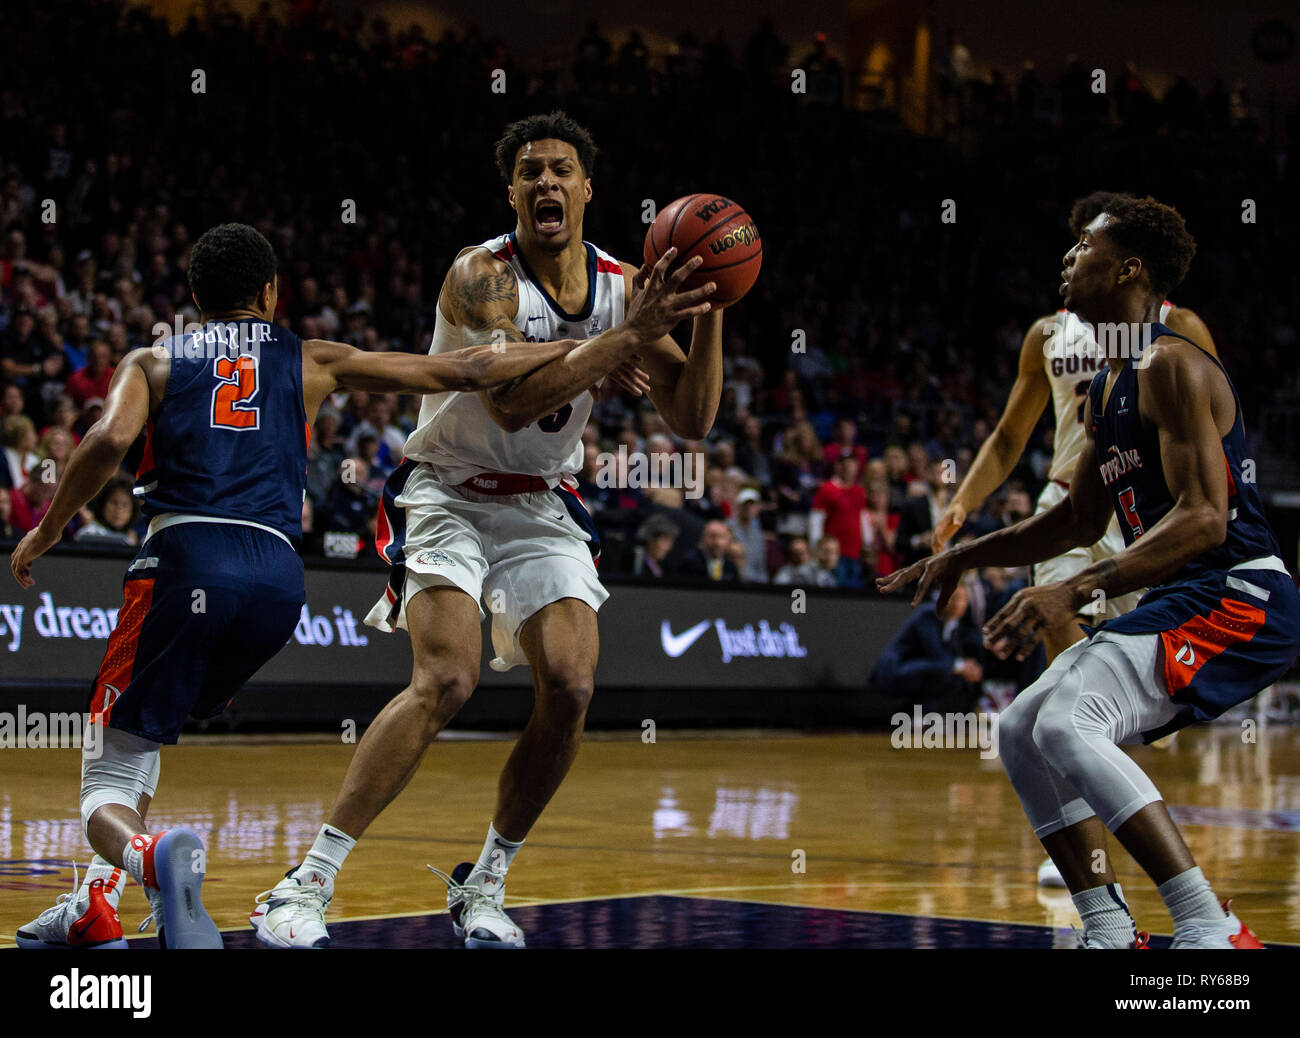 Mar 11 2019 Las Vegas, NV, U.S.A. Gonzaga forward Brandon Clarke (15) drives to the basket during the NCAA West Coast Conference Men's Basketball Tournament semi -final between the Pepperdine Wave and the Gonzaga 100-74 win Bulldogs at Orleans Arena Las Vegas, NV. Thurman James/CSM Stock Photo